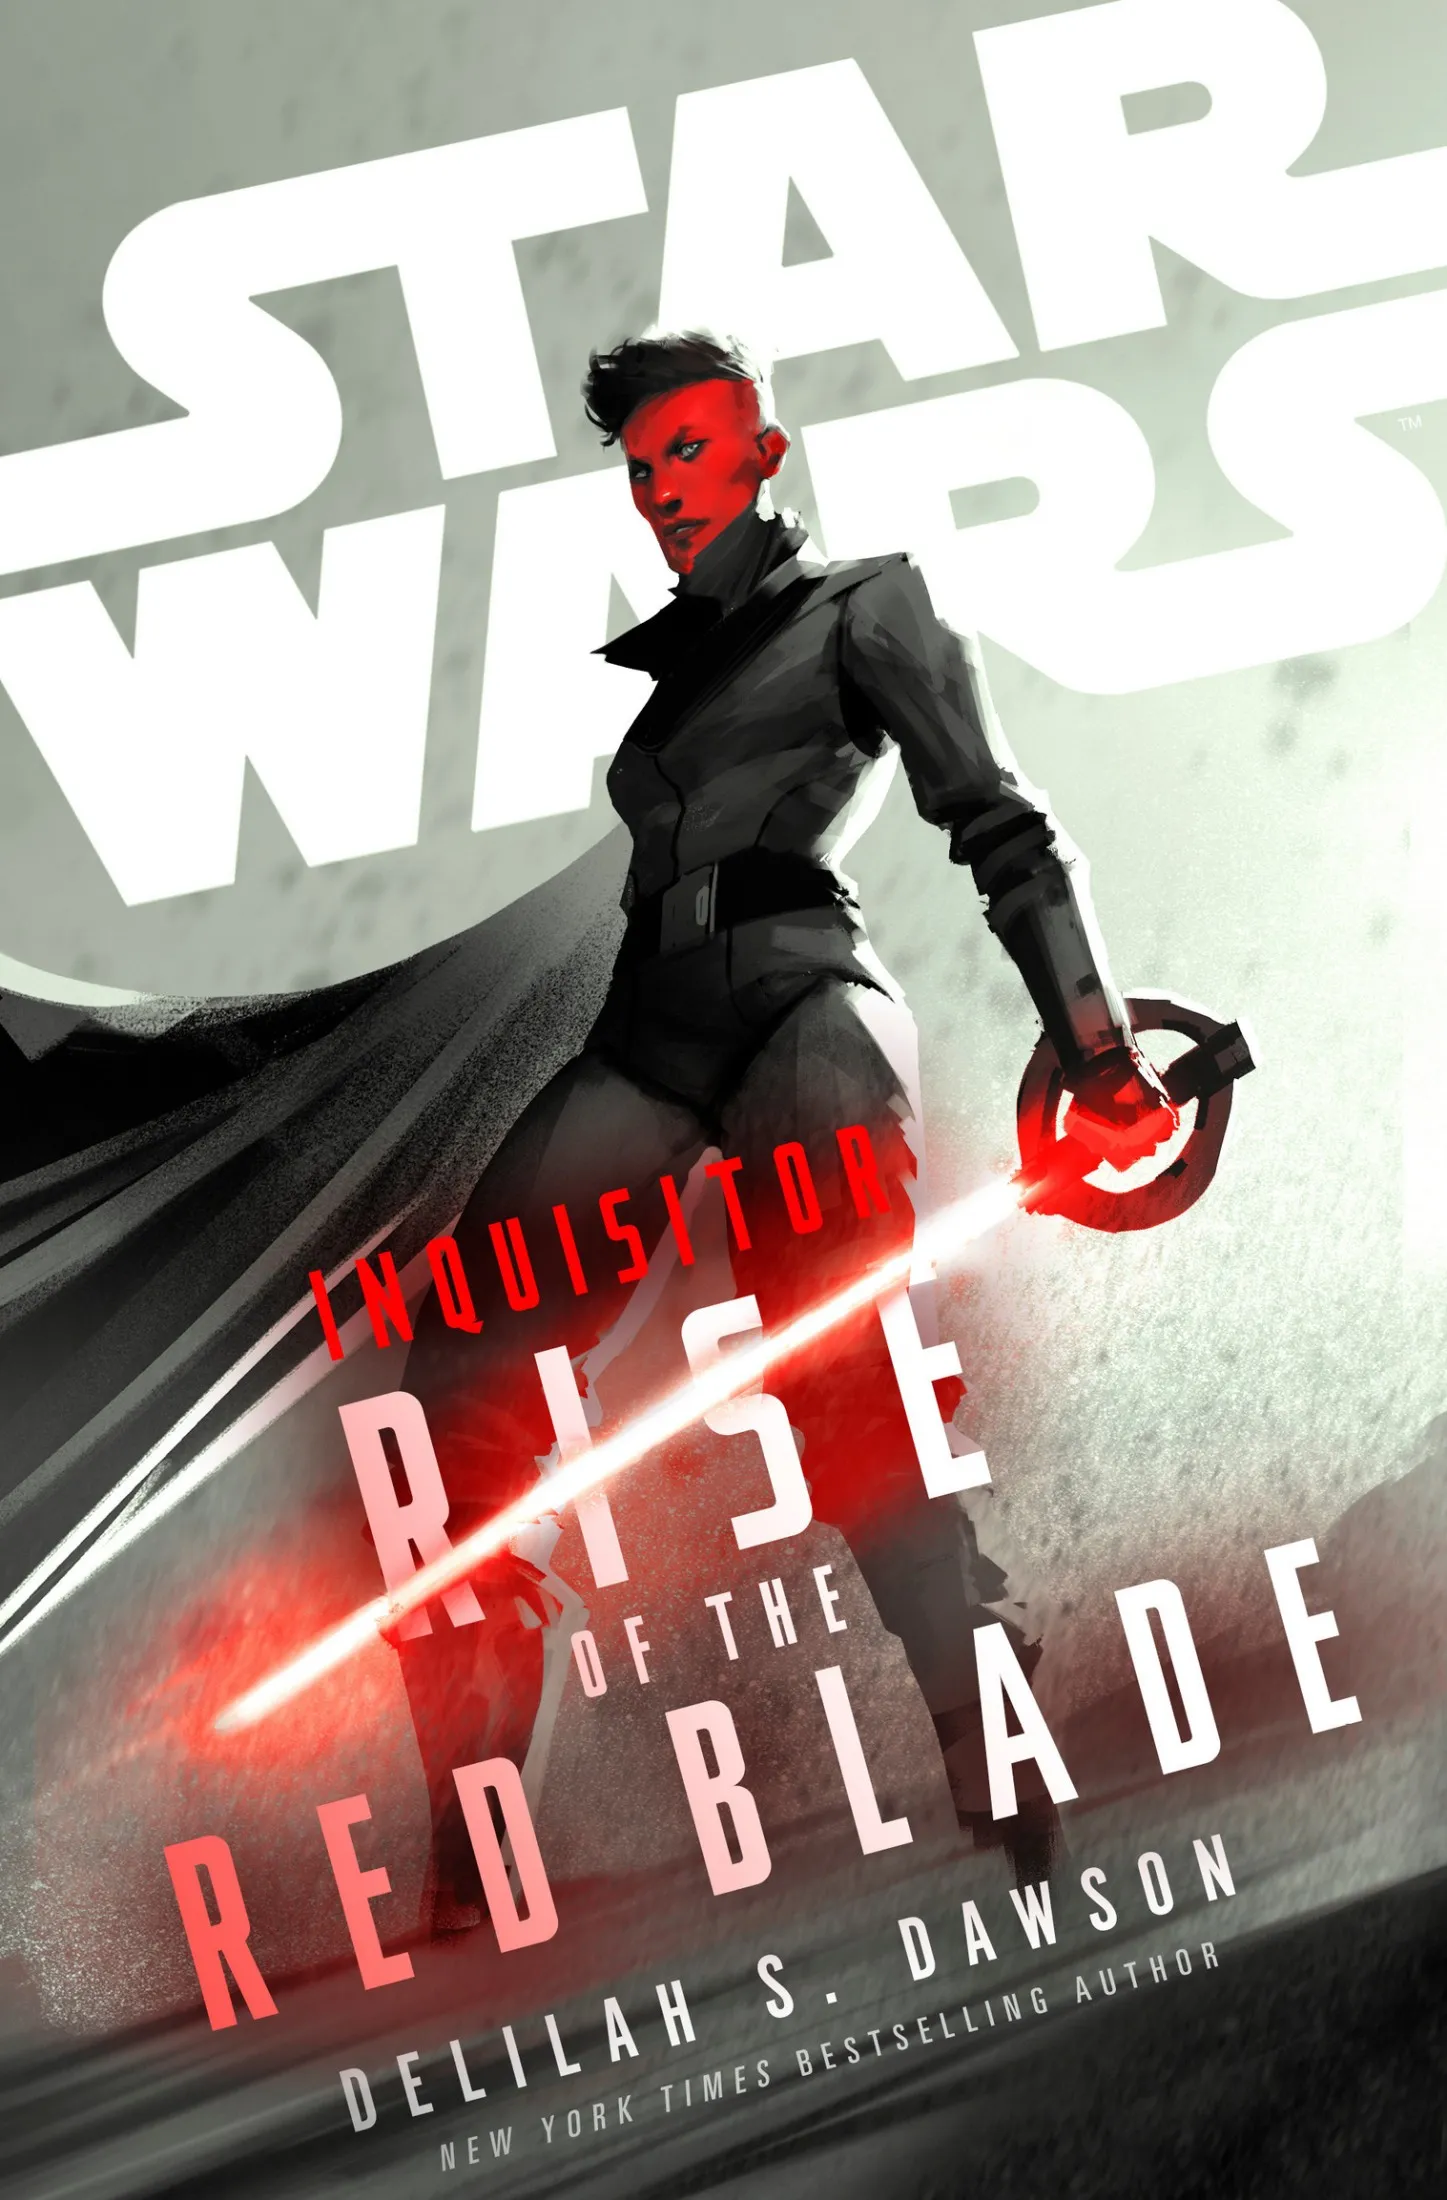 Inquisitor: Rise of the Red Blade (Star Wars Disney)